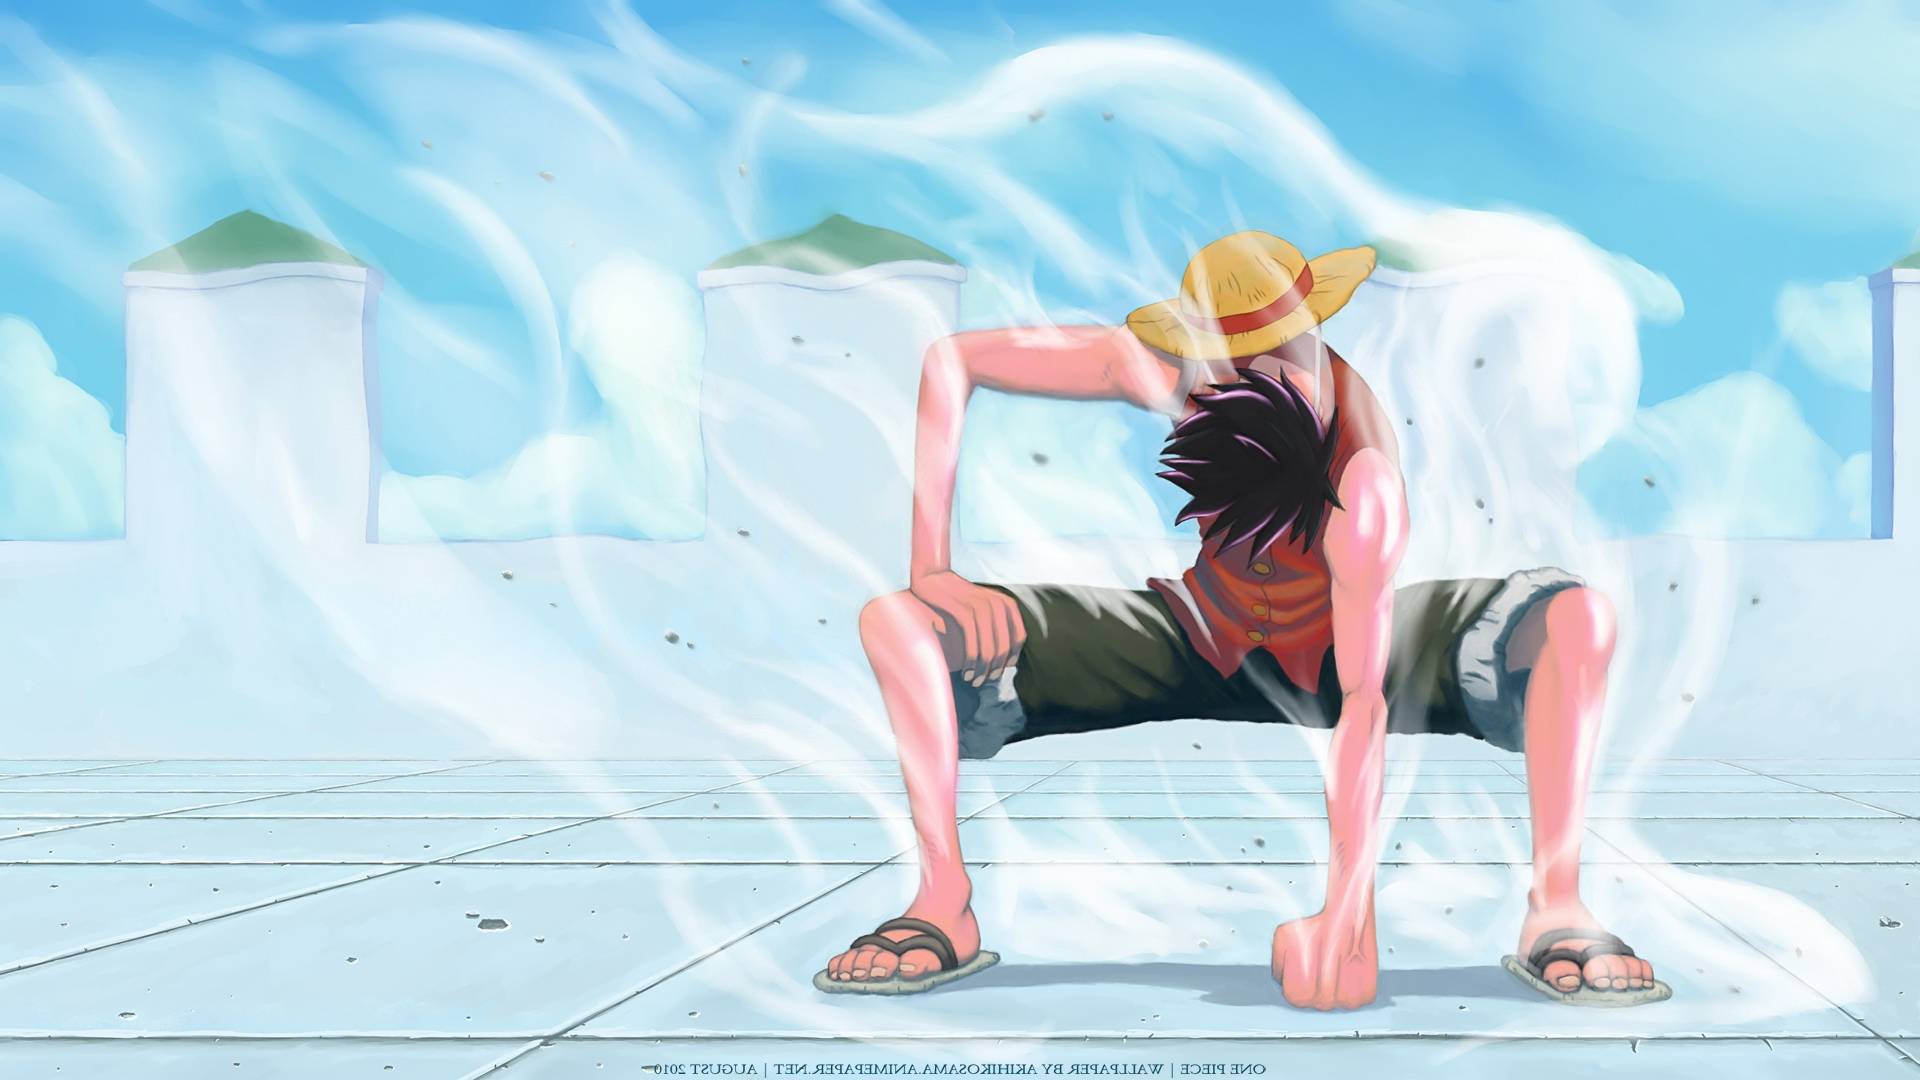 Luffy Gear Wallpapers Wallpaper Cave